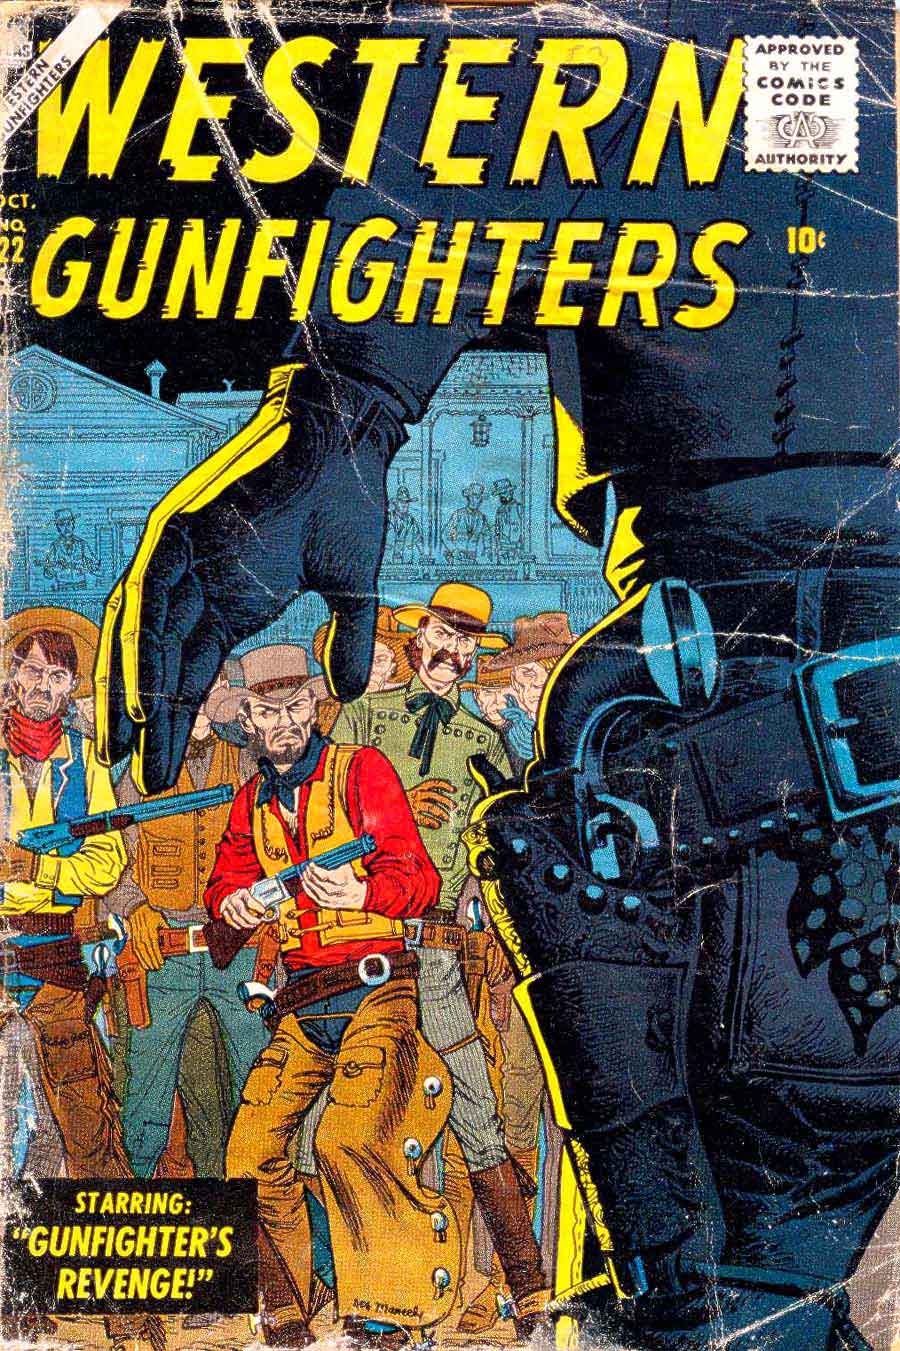 Atlas western golden age 1950s comic book cover - Western Gunfighters #22